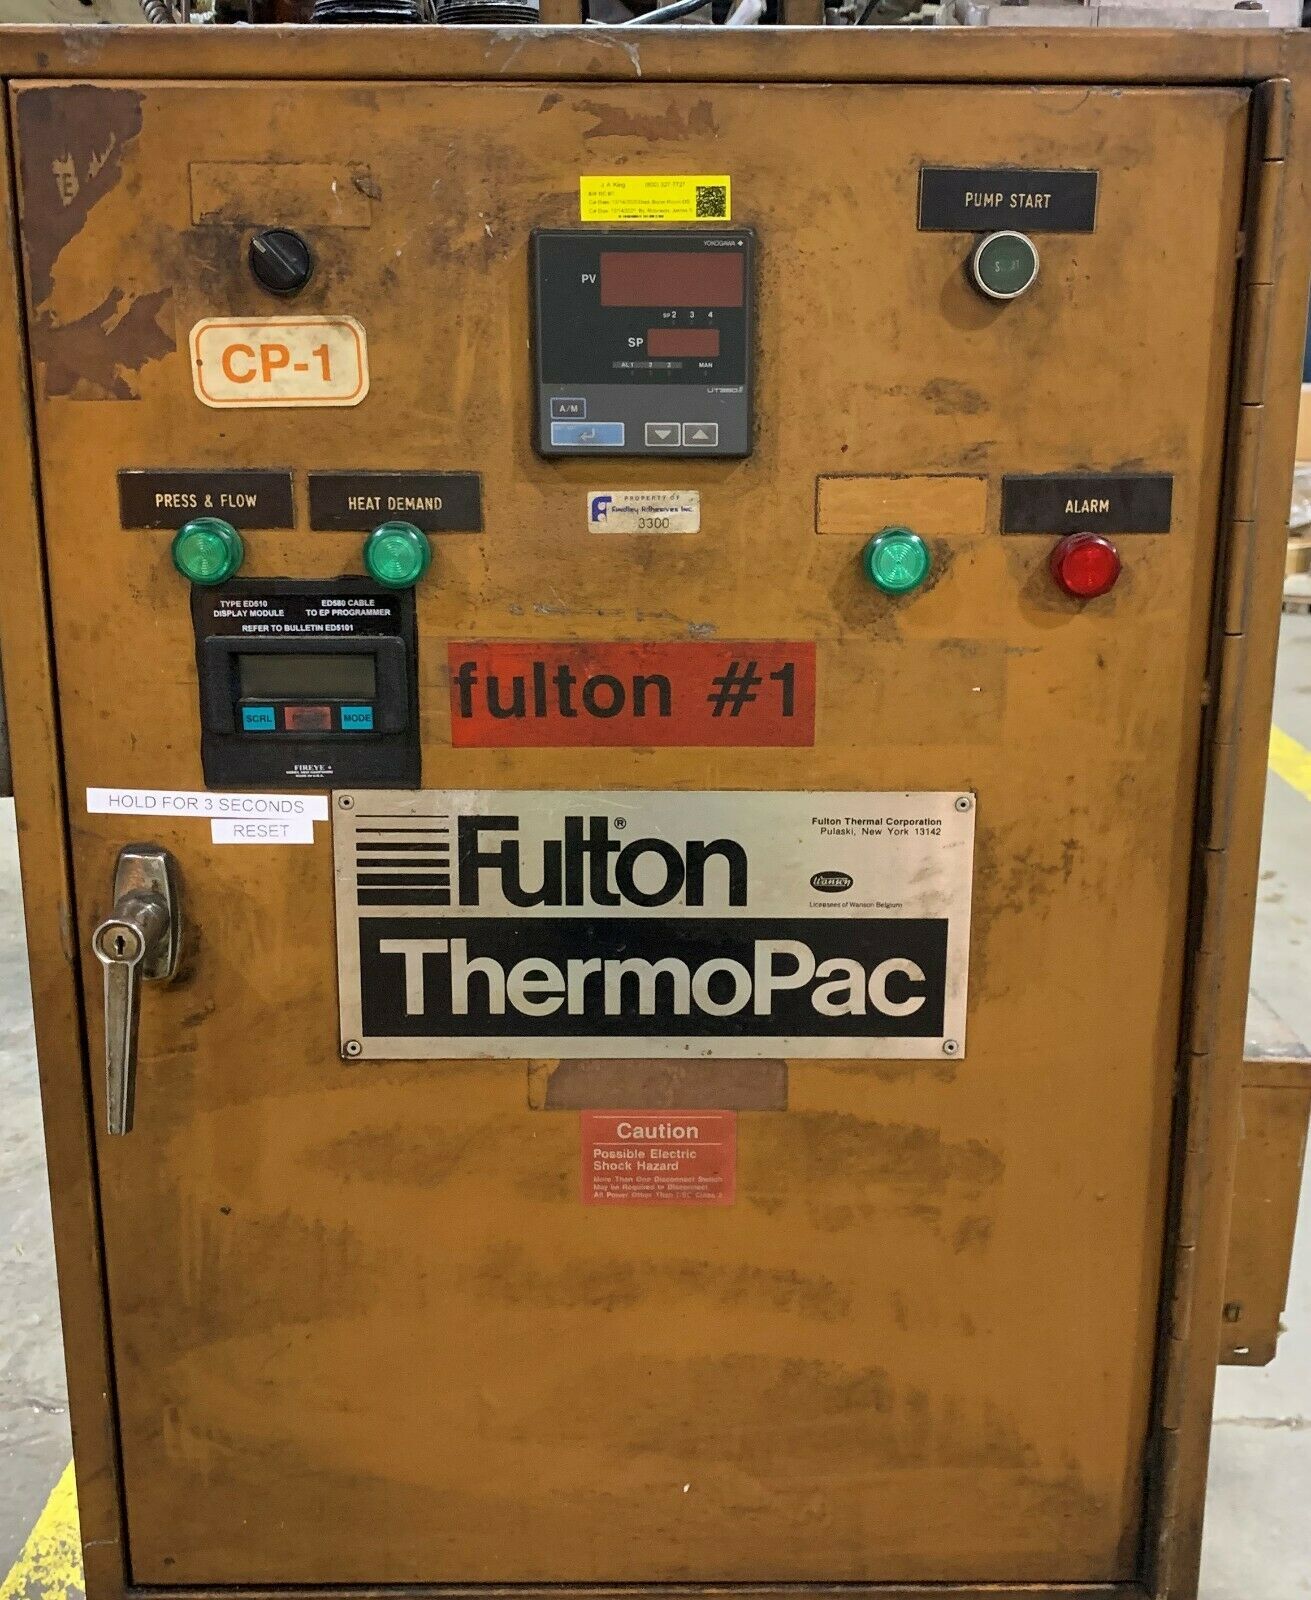 FULTON FT-0160-C Chillers, Boilers, and HVAC | ESS INDUSTRIAL